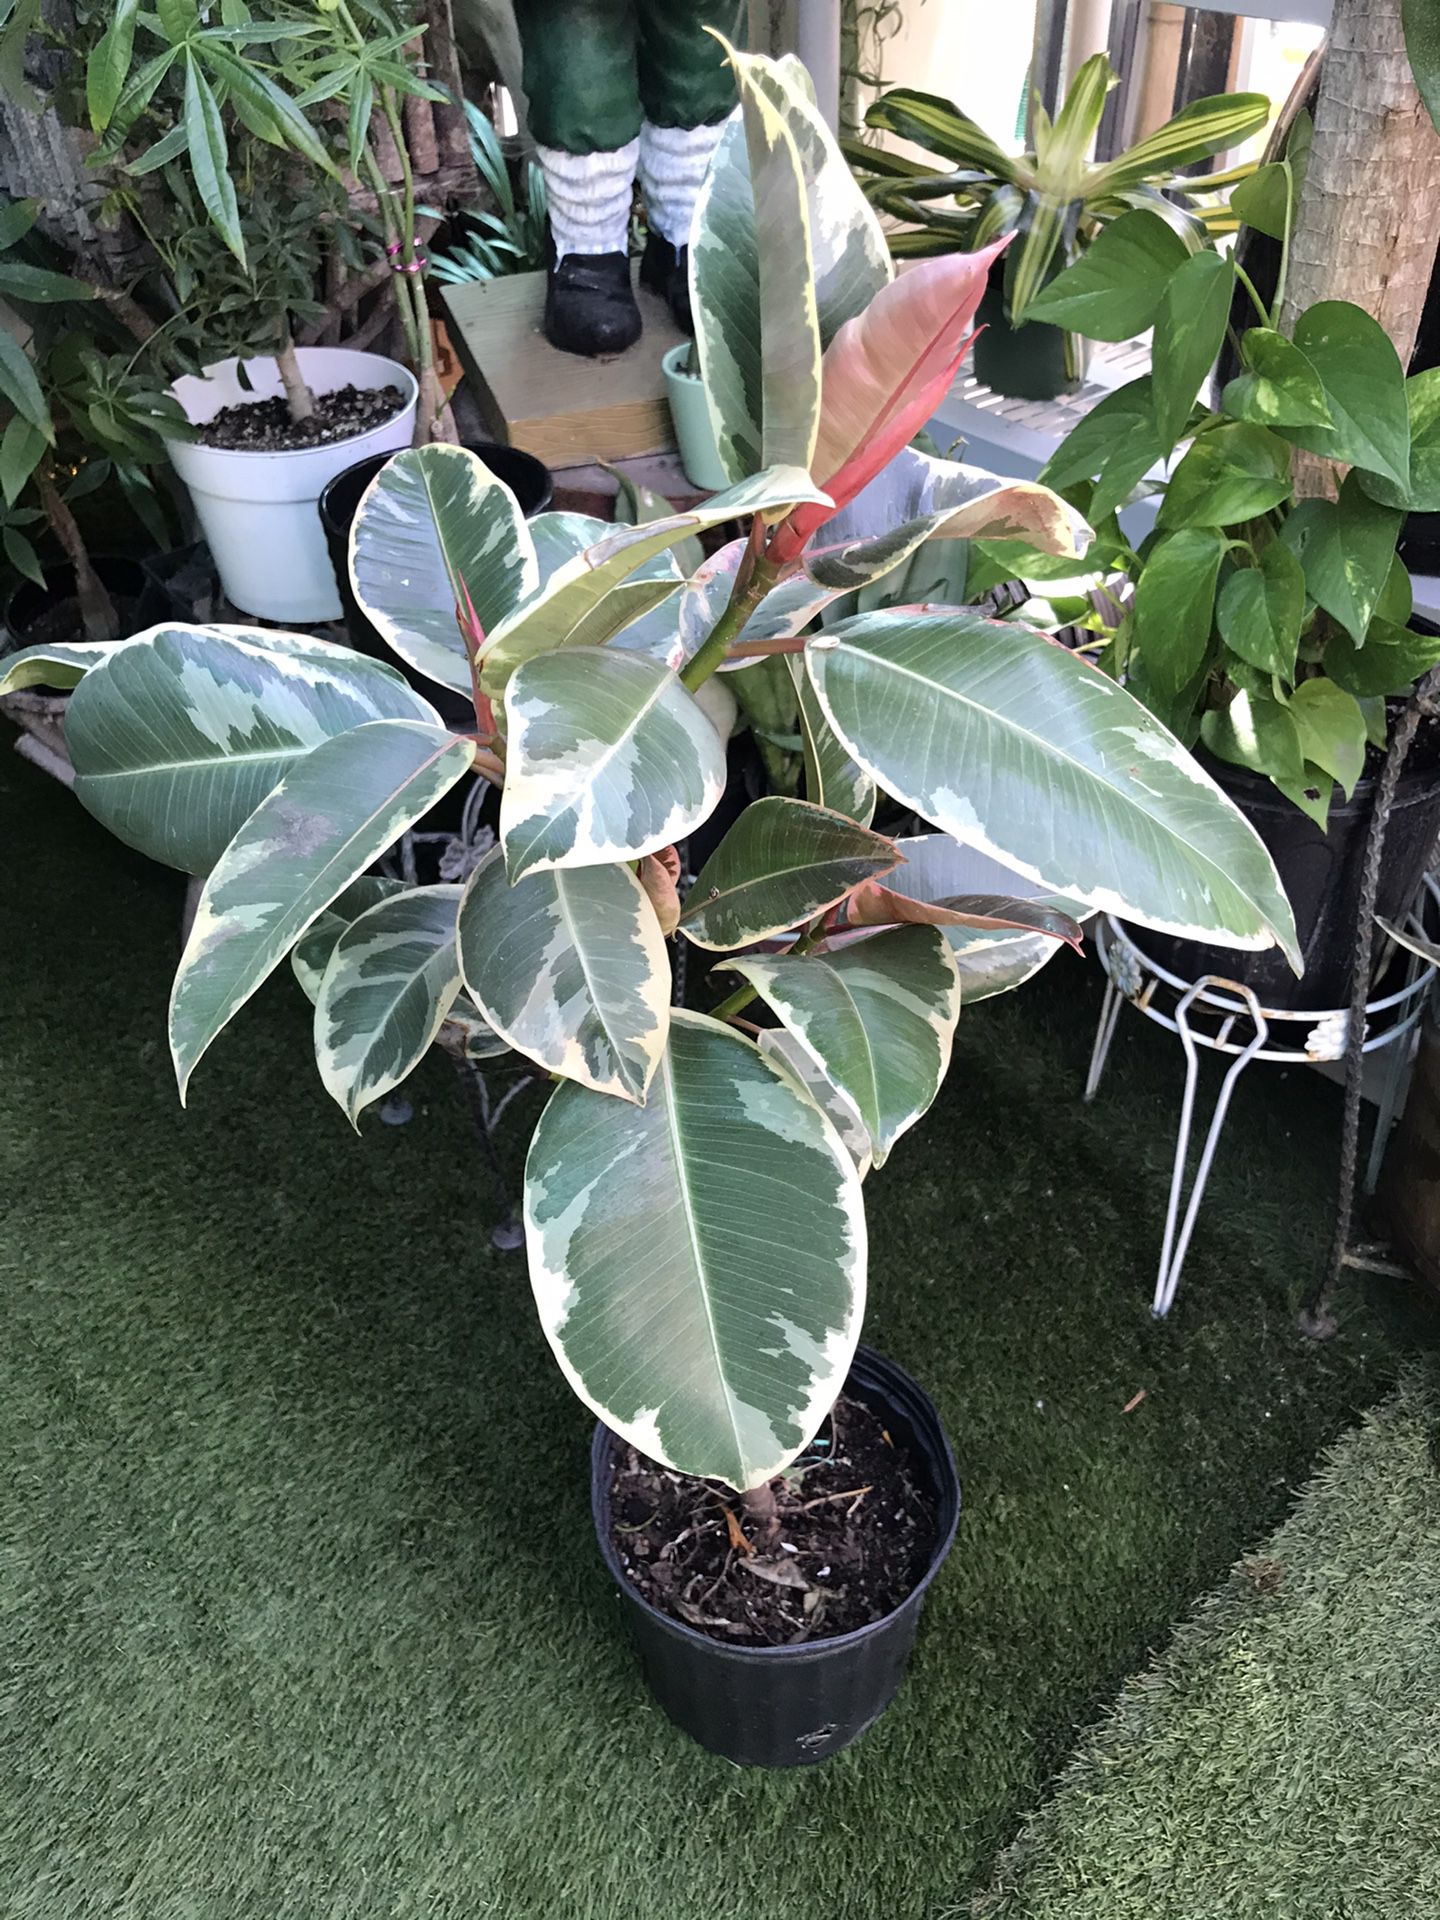 Plants (3ft x 3gallons Variegated Rubber plant $15)